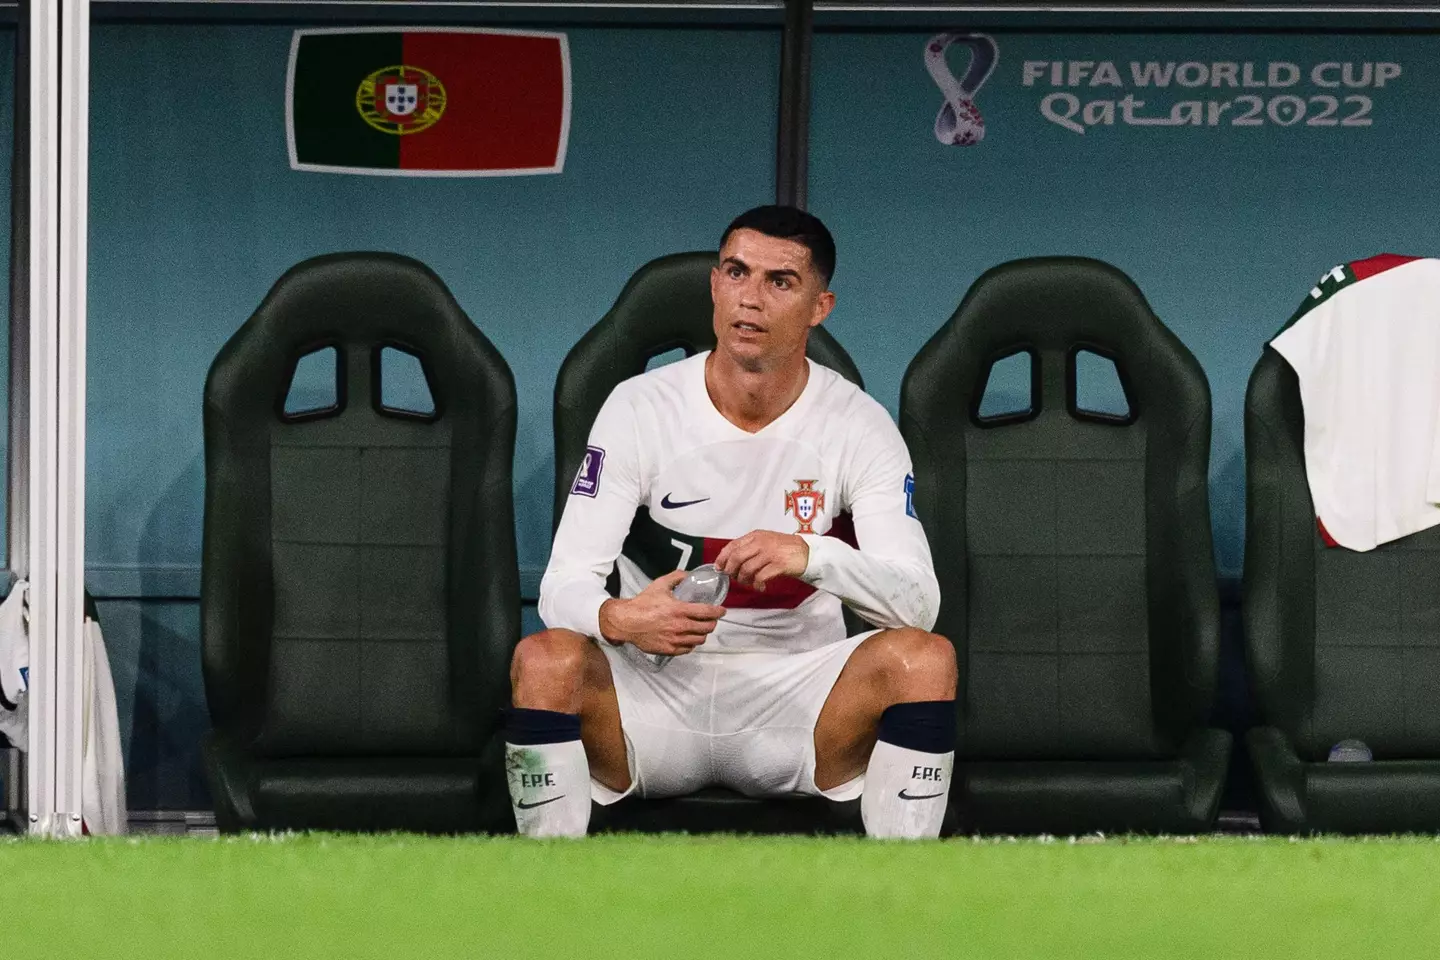 Ronaldo was substituted in all three group games. (Image